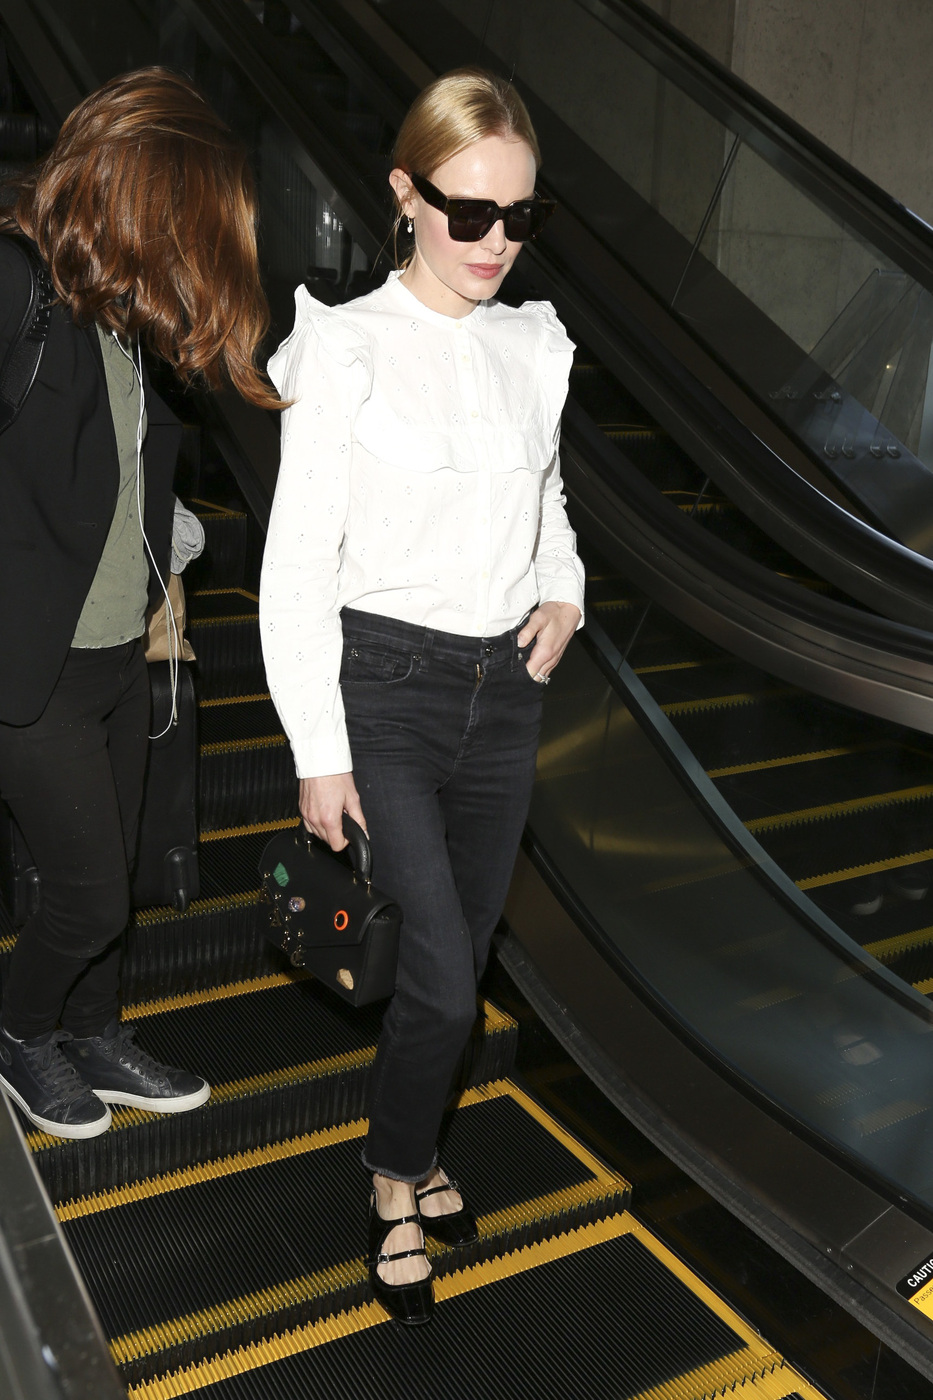 Kate Bosworth wears a white ruffle shirt with black jeans and black Mary Jane flats.